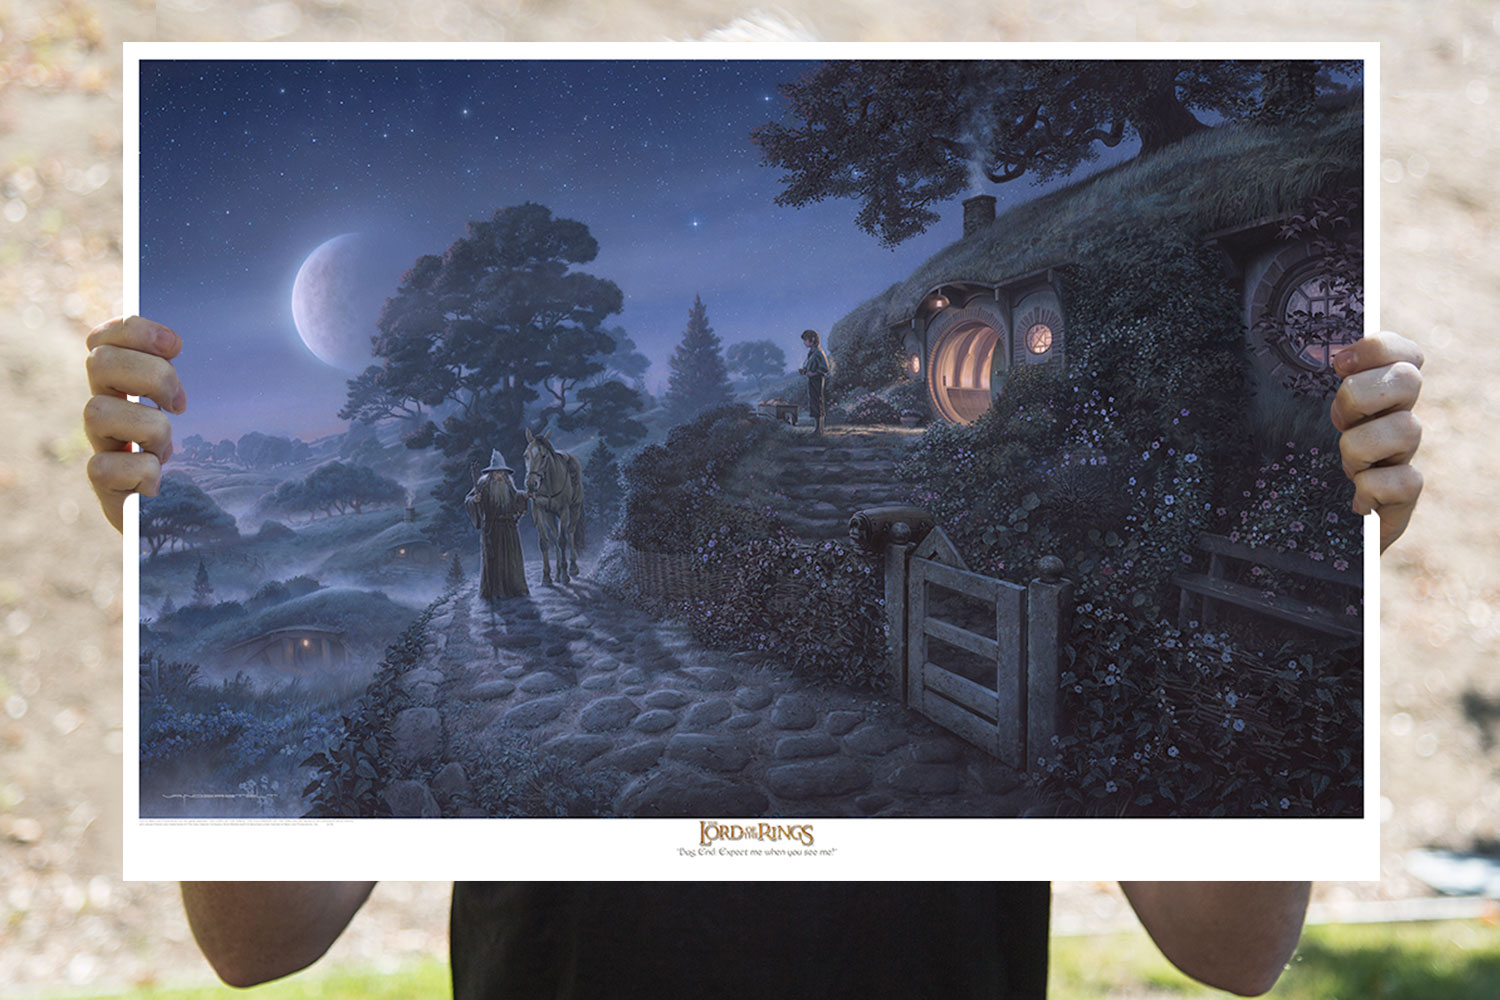 Bag End: Expect Me When You See Me! The Lord of the Rings Art Print